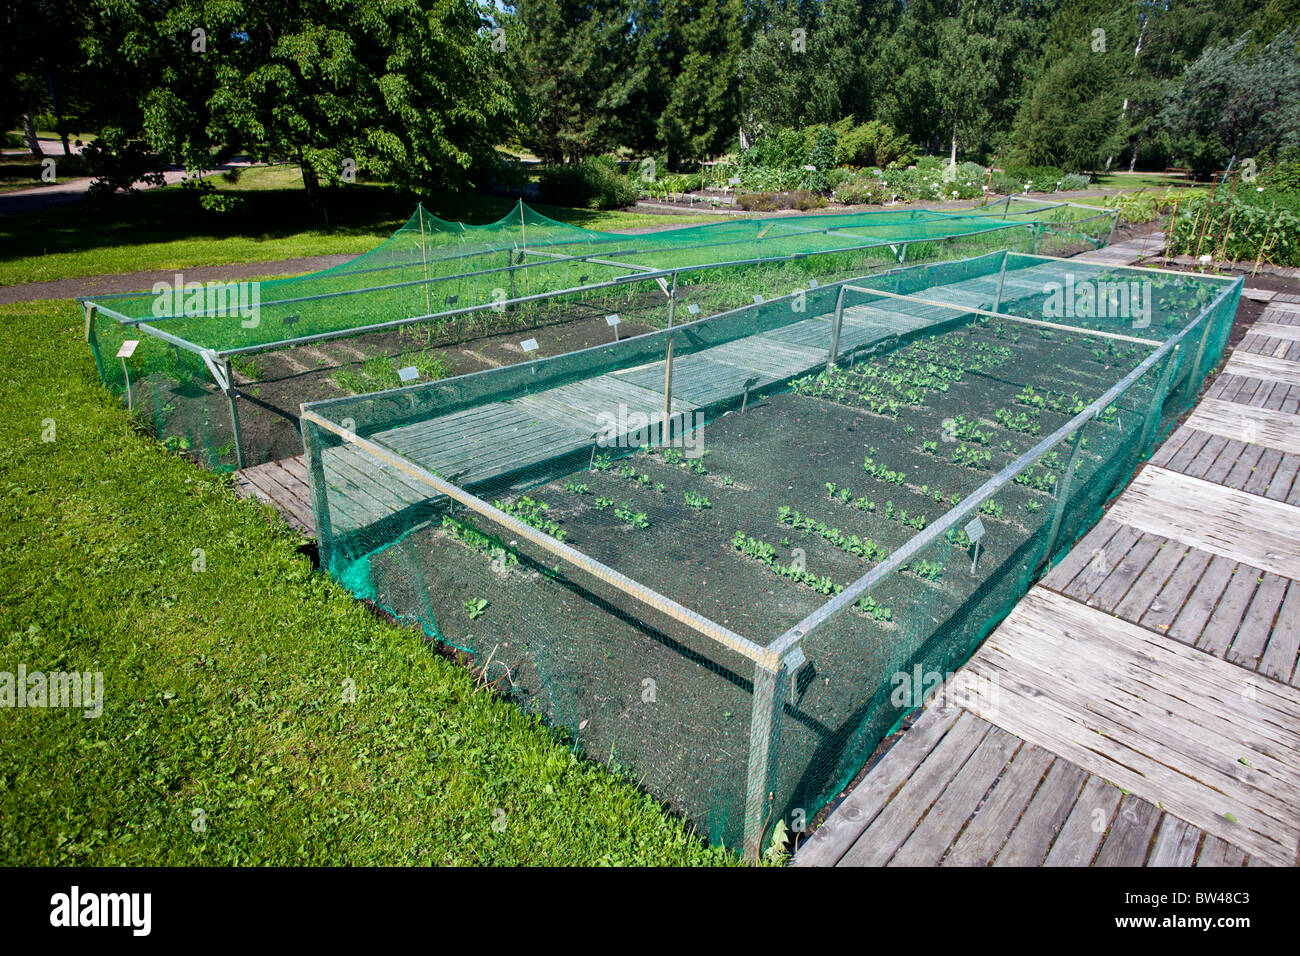 Nylon bird mesh netting at the Oulu University botanical garden protects vegetable sprouts against birds and other pests , Finland Stock Photo